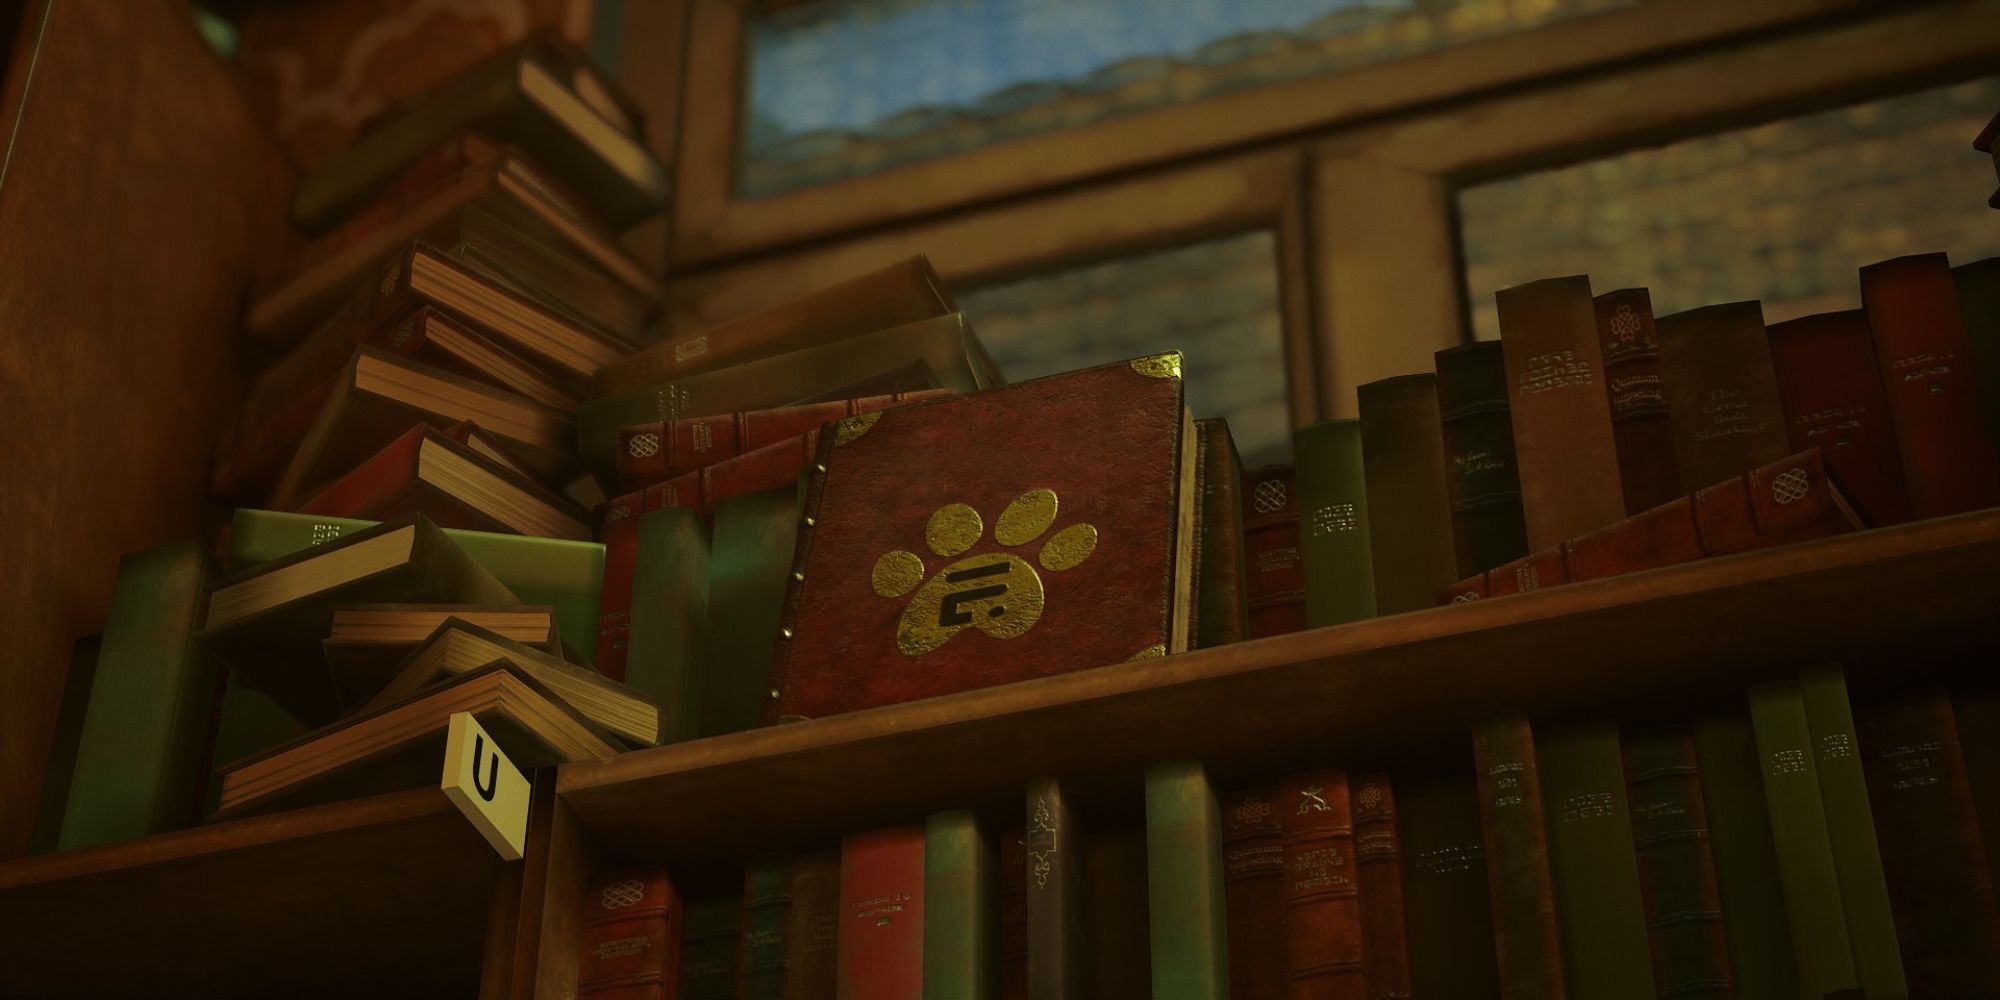 a journal with a paw print embossed on the cover sits on the bookshelf